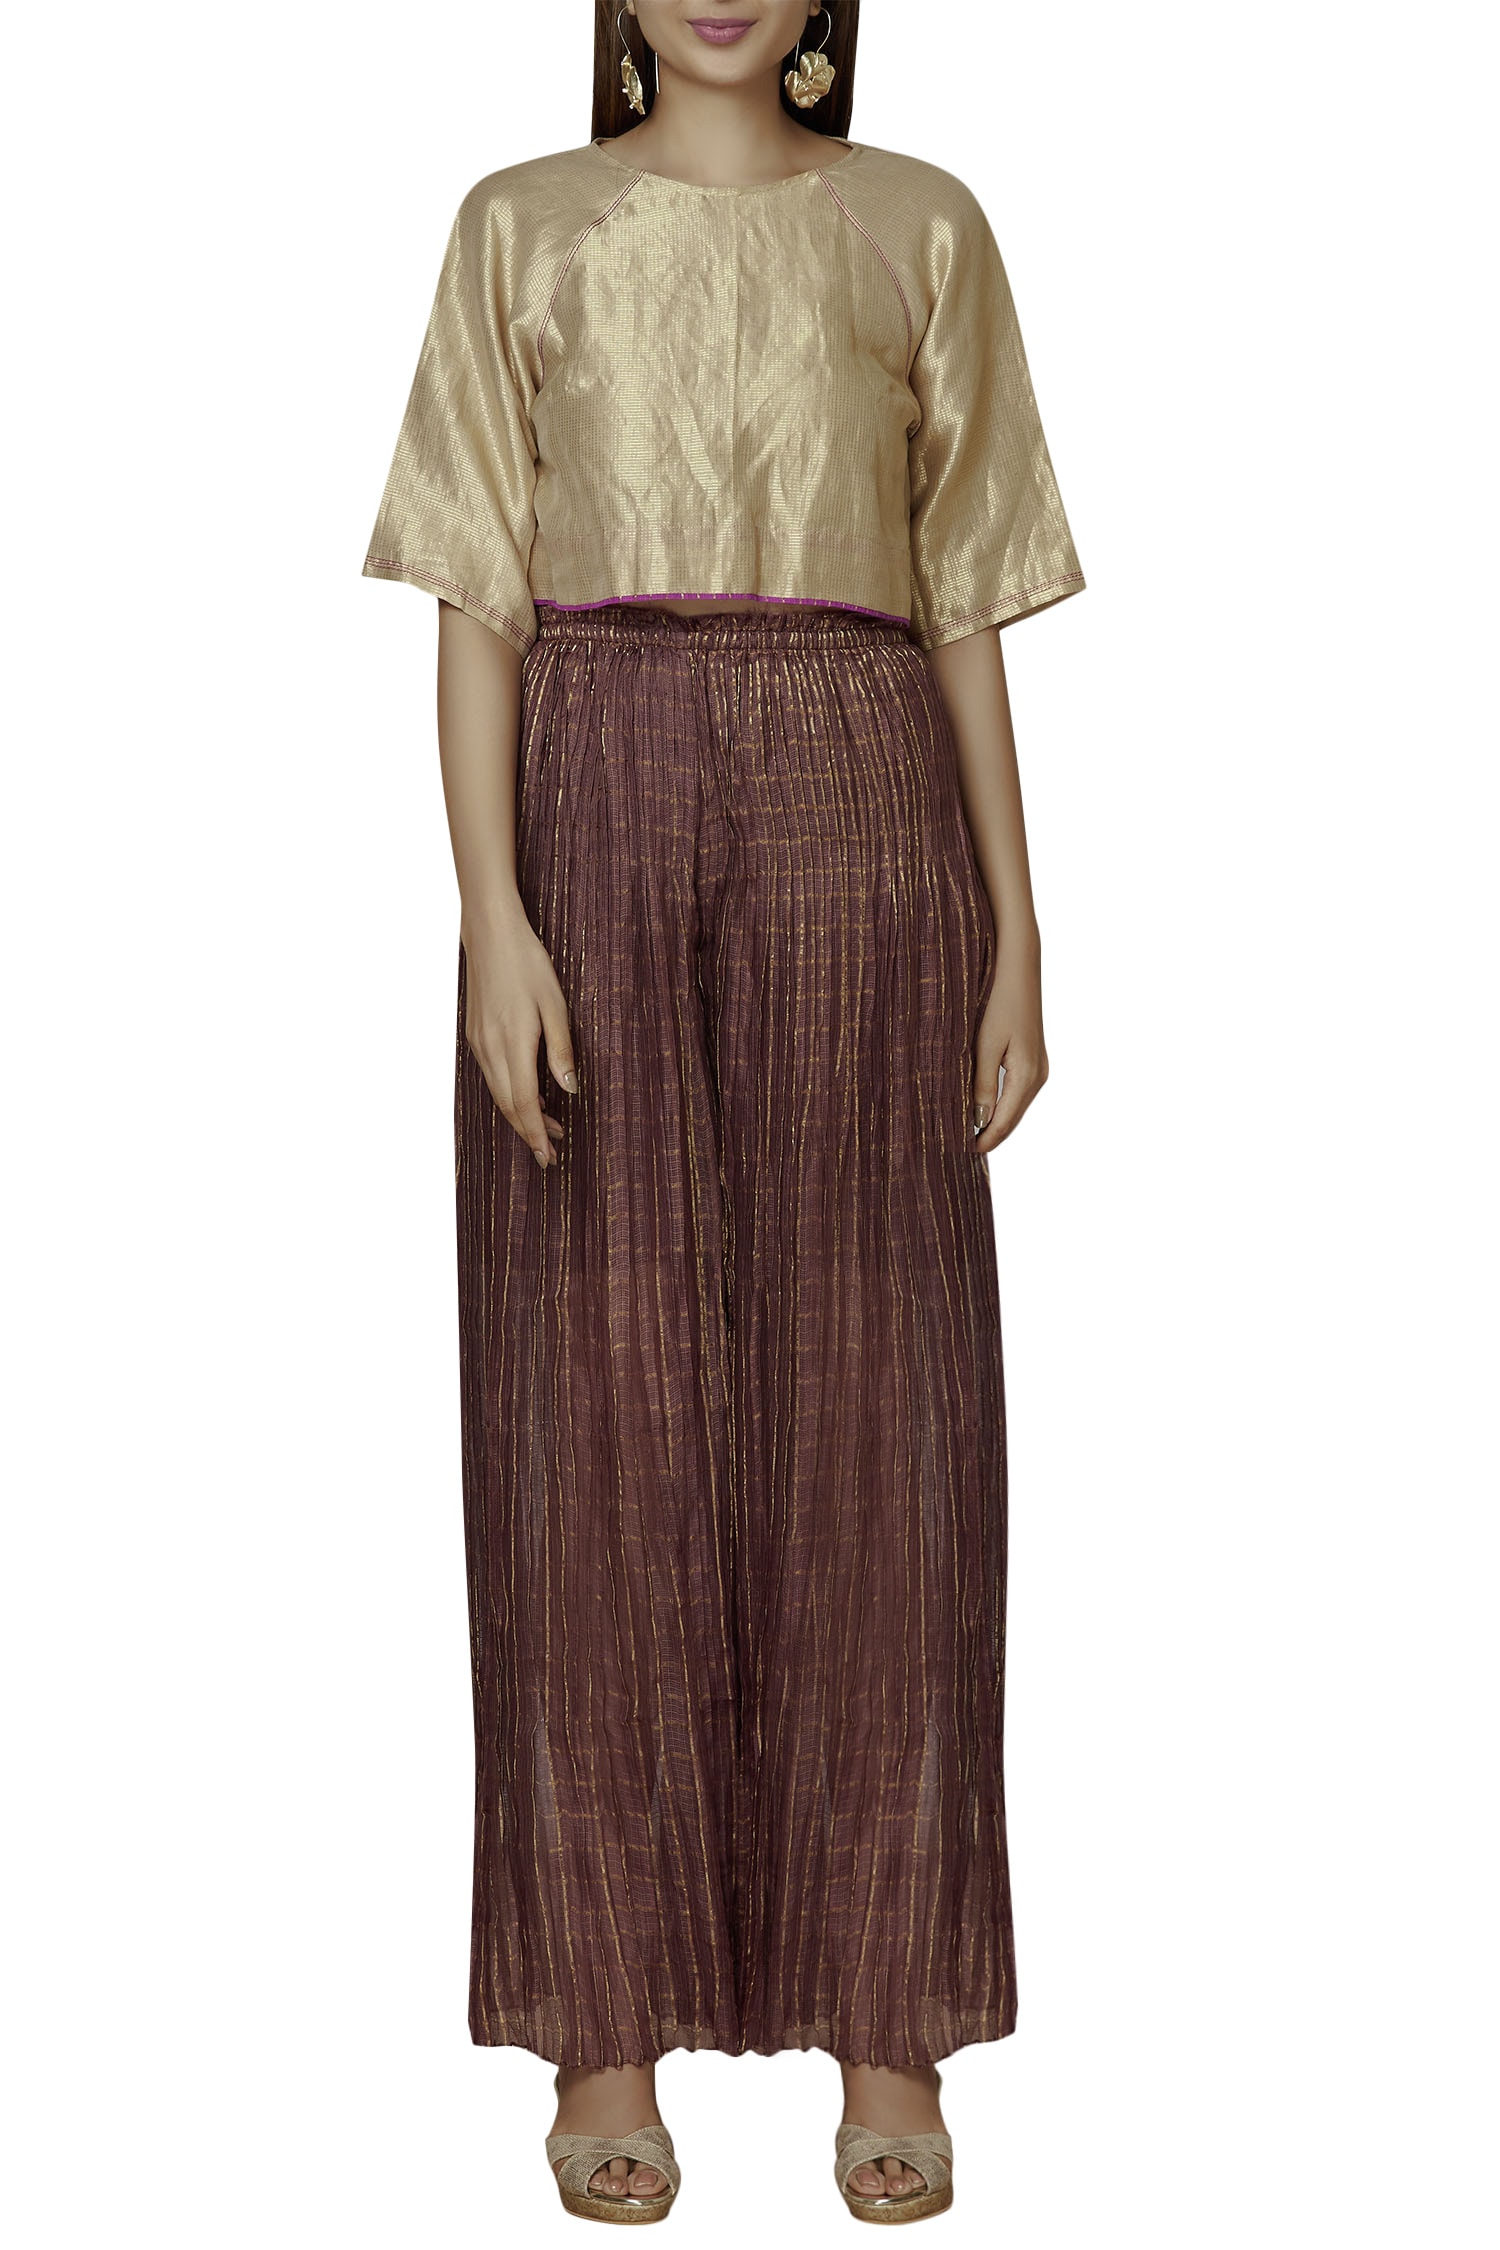 Buy MONSKYIN Women's Solid Free Size Rayon Palazzo Pants (Marown) Light  Brown at Amazon.in